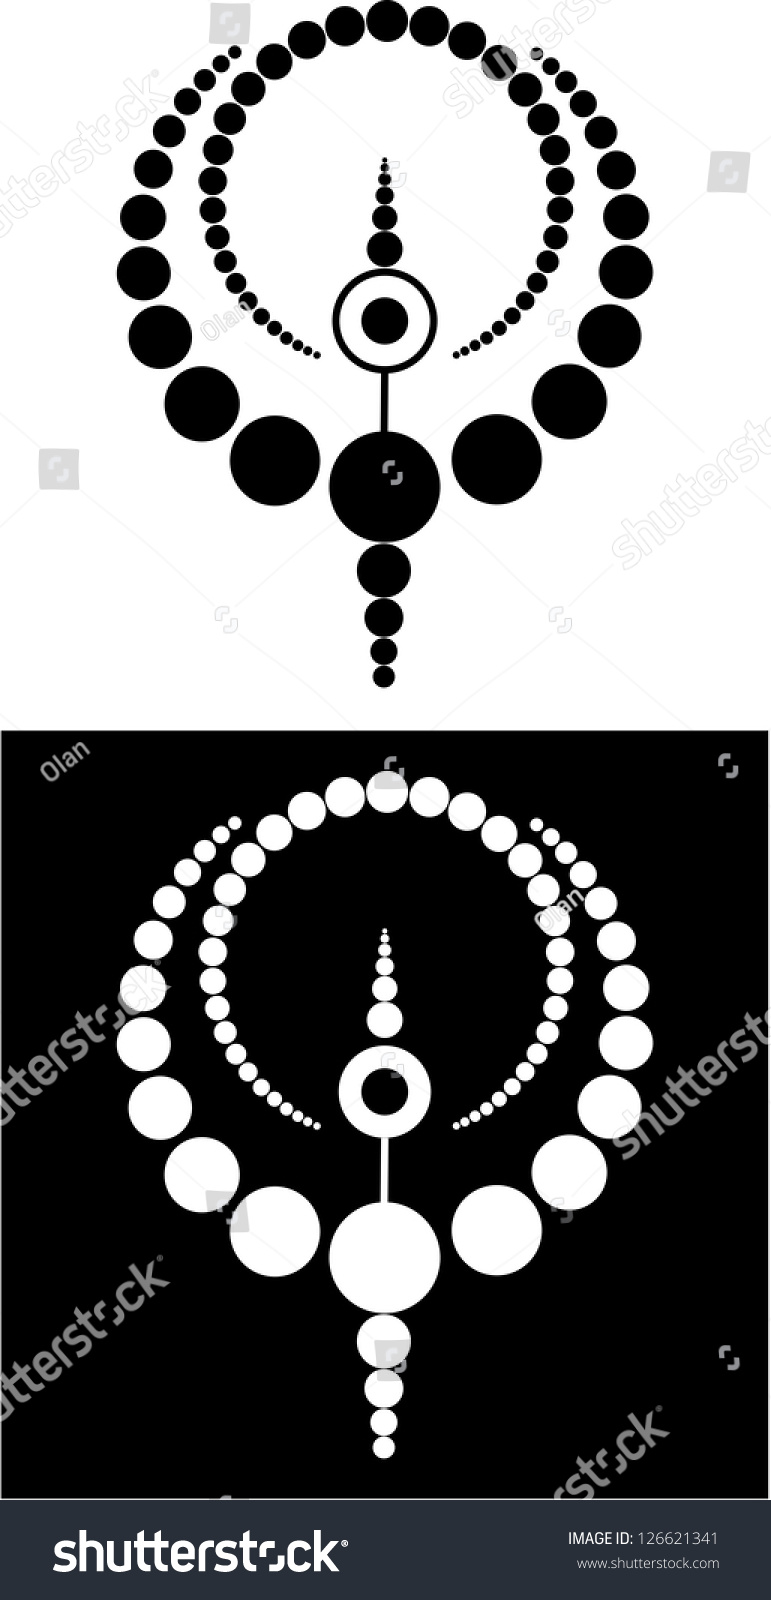 SVG of Abstract circular design made of circles in black and white svg